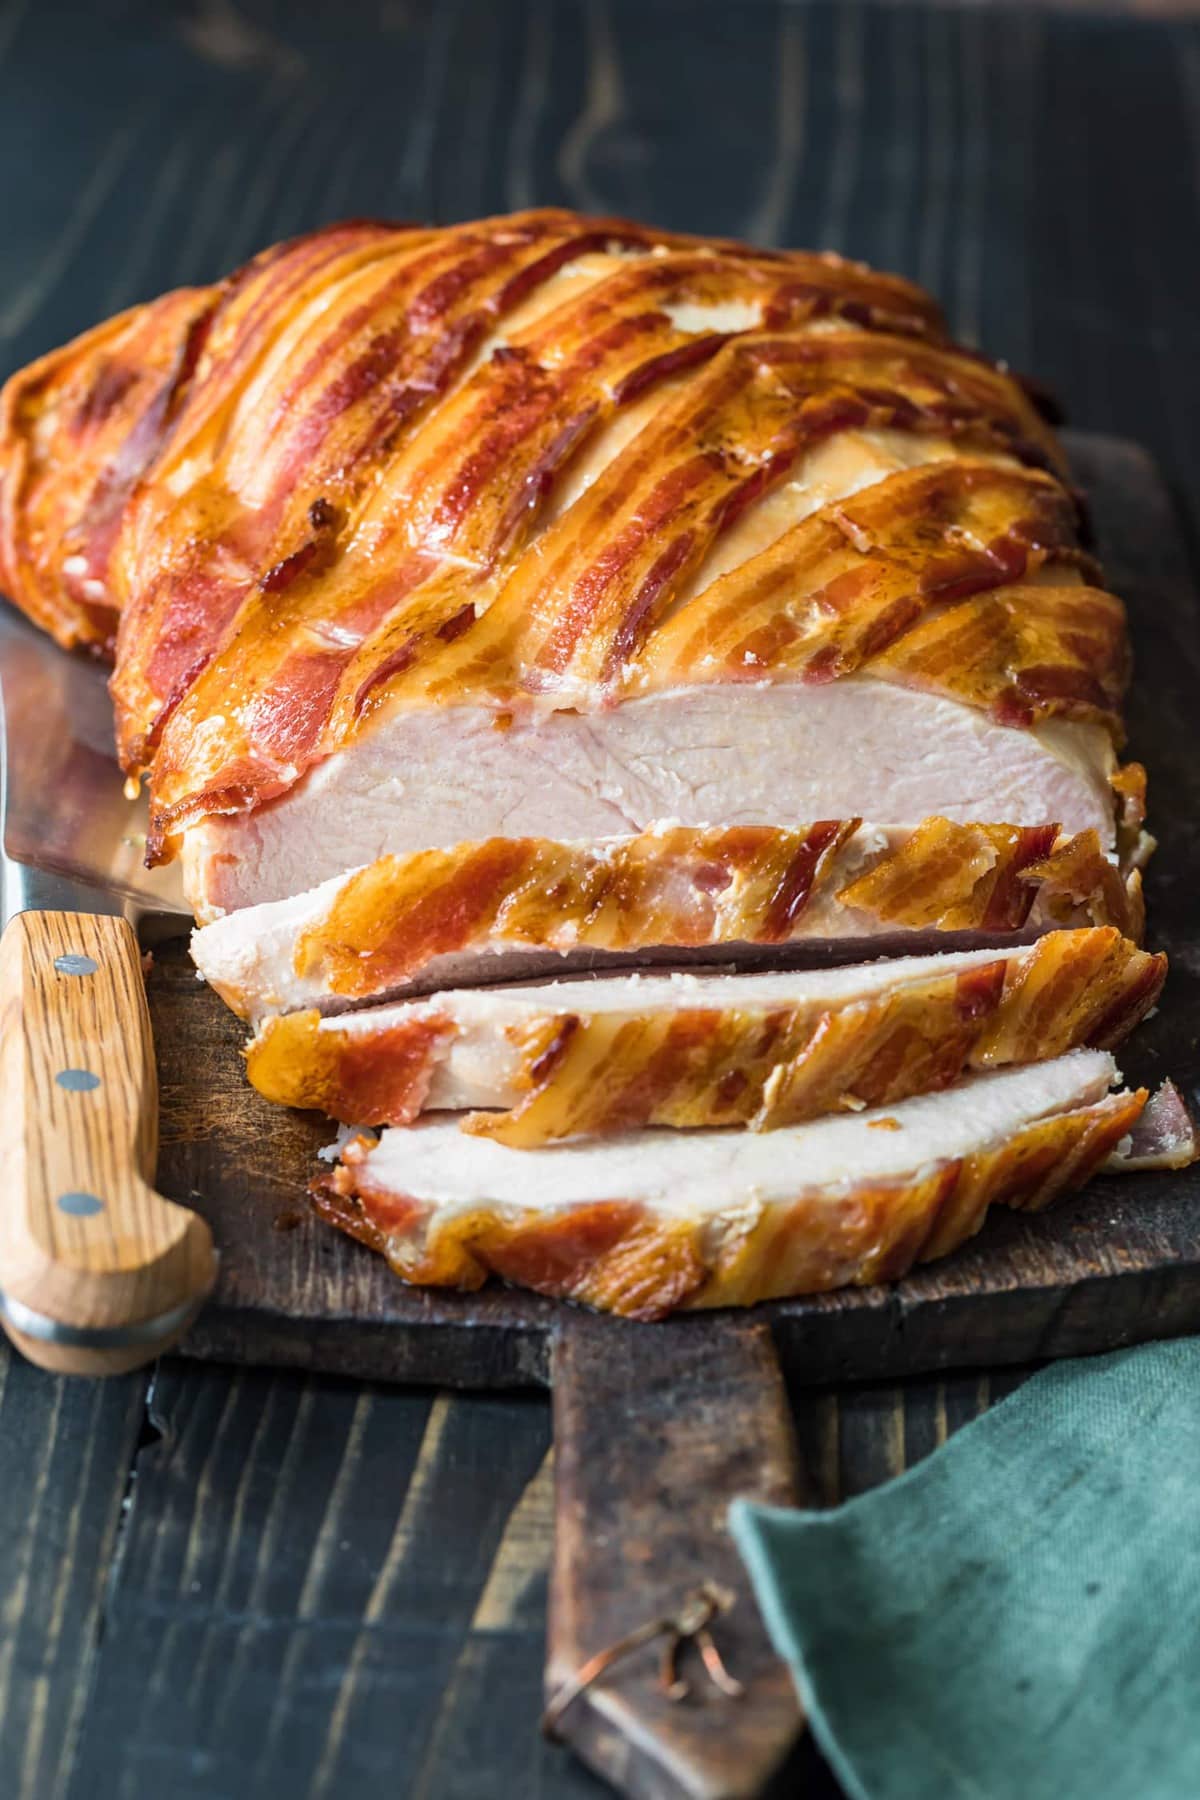 Bacon wrapped turkey breast being sliced